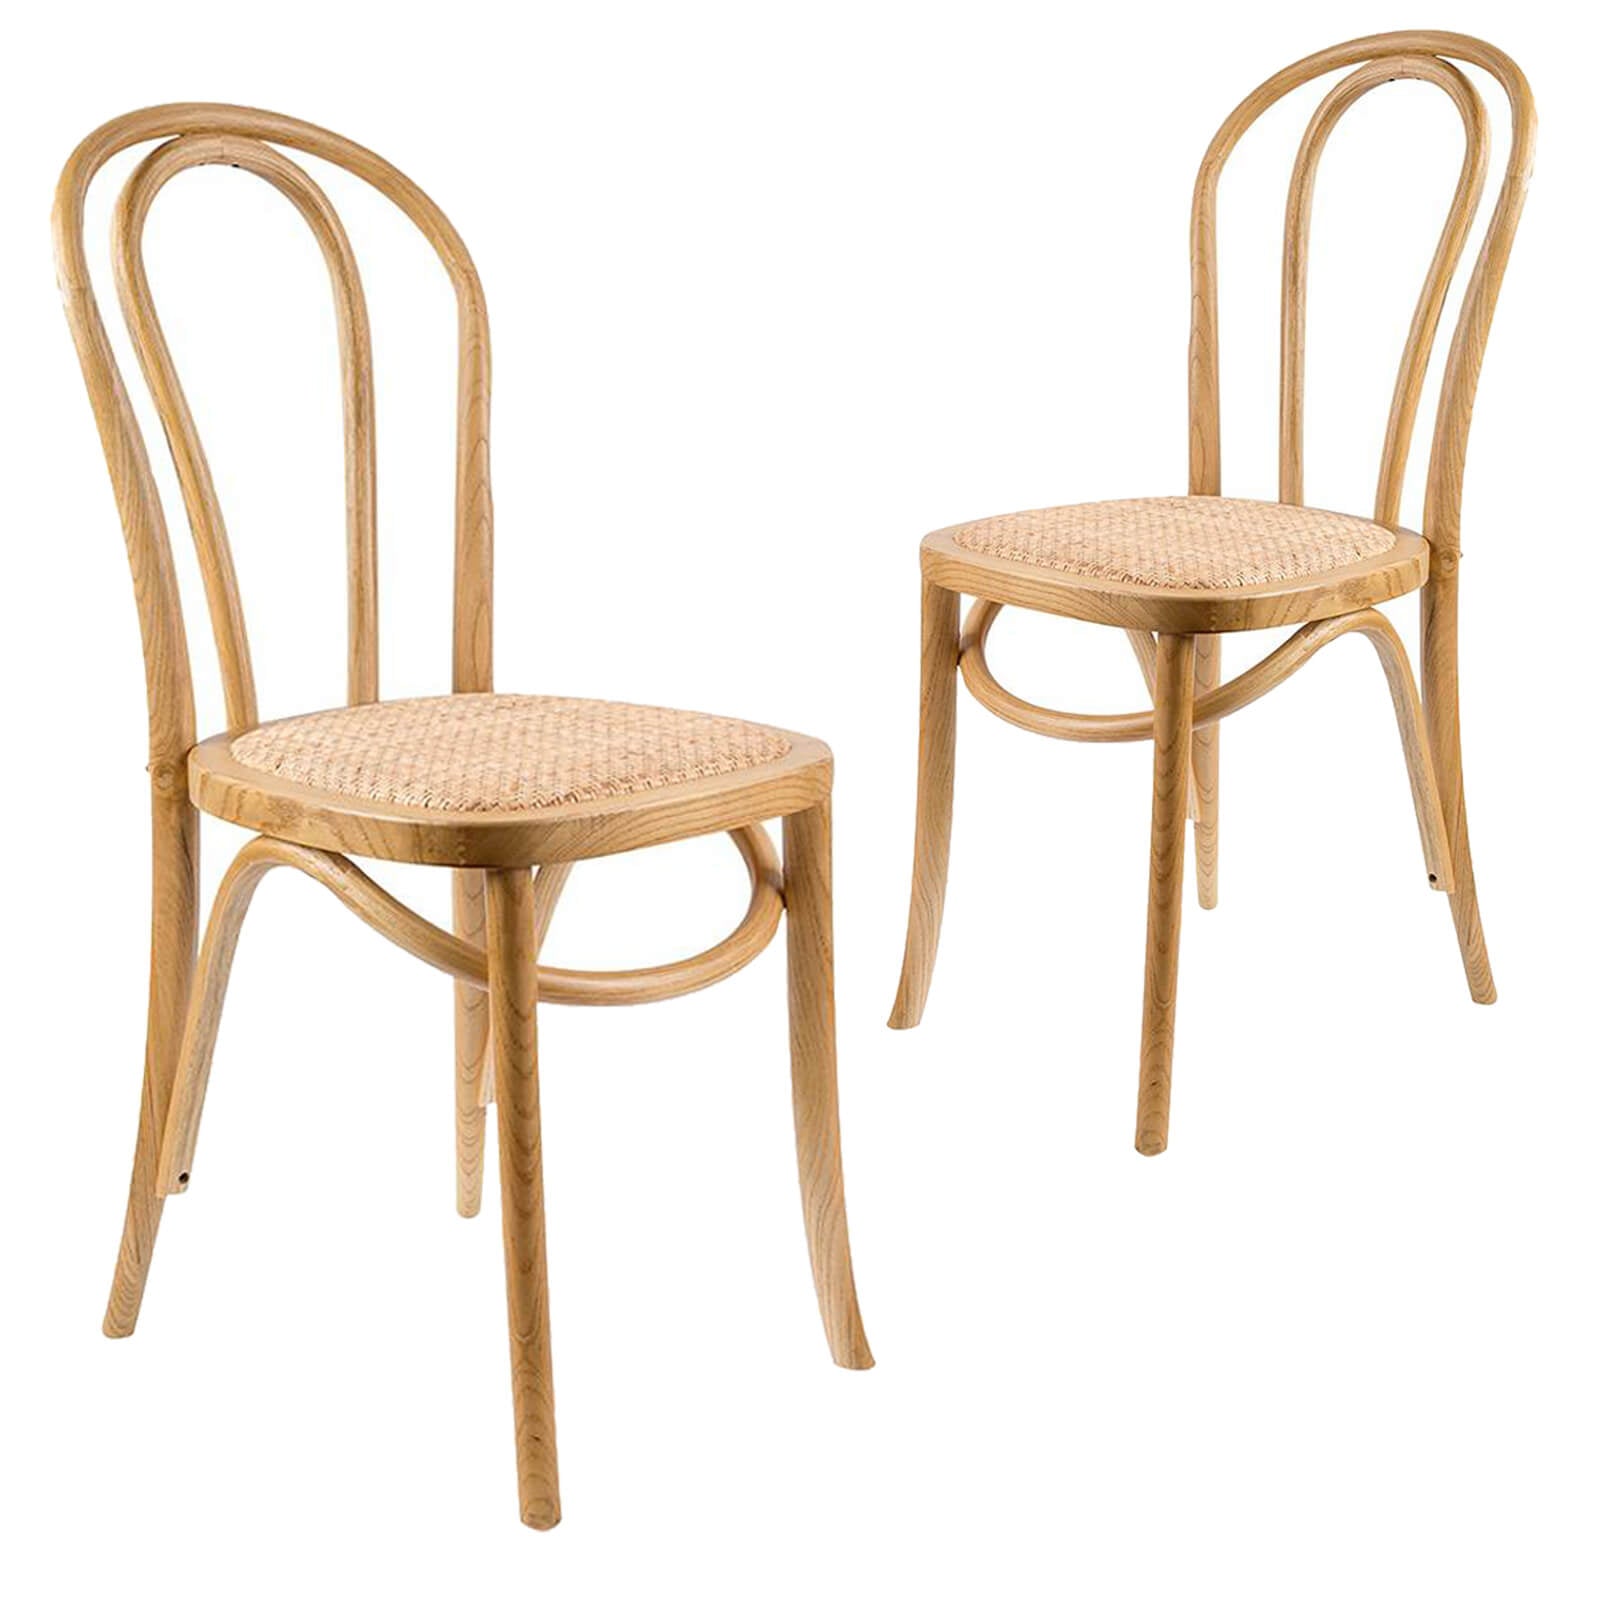 Maine | Farmhouse Coastal Wooden Rattan Dining Chairs | Set Of 2 | Natural